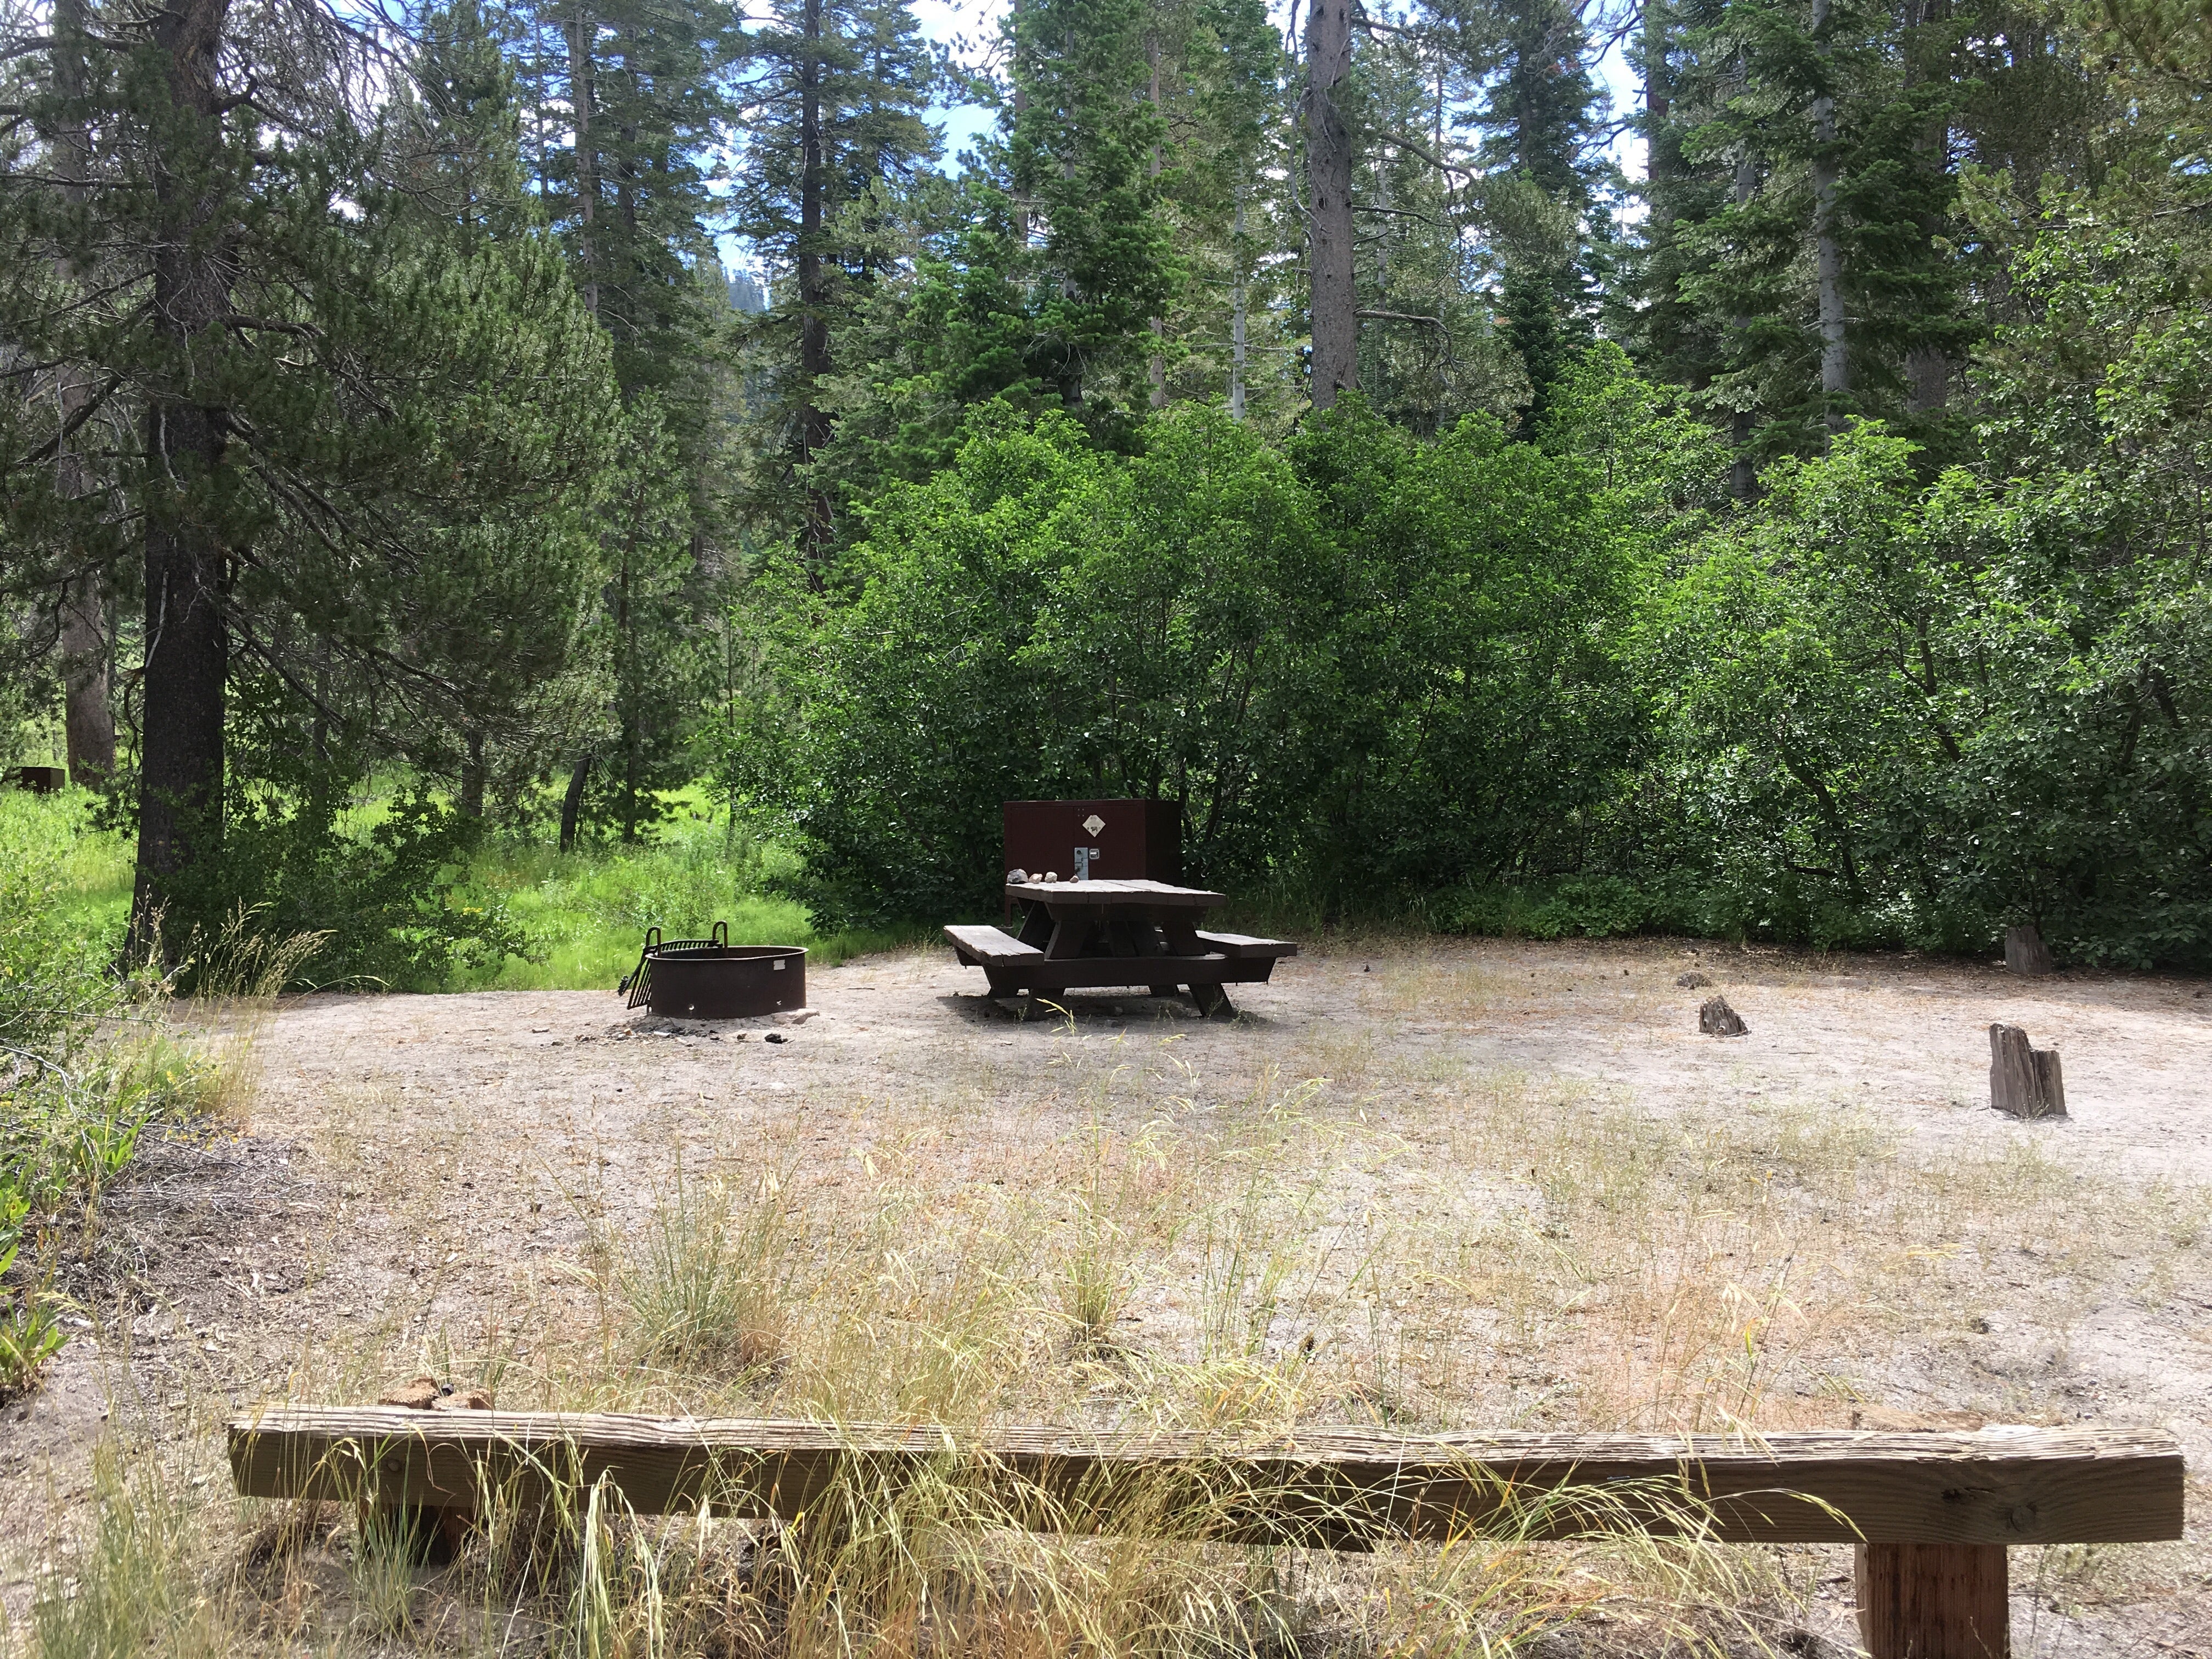 Camper submitted image from Reds Meadow Campground - 4